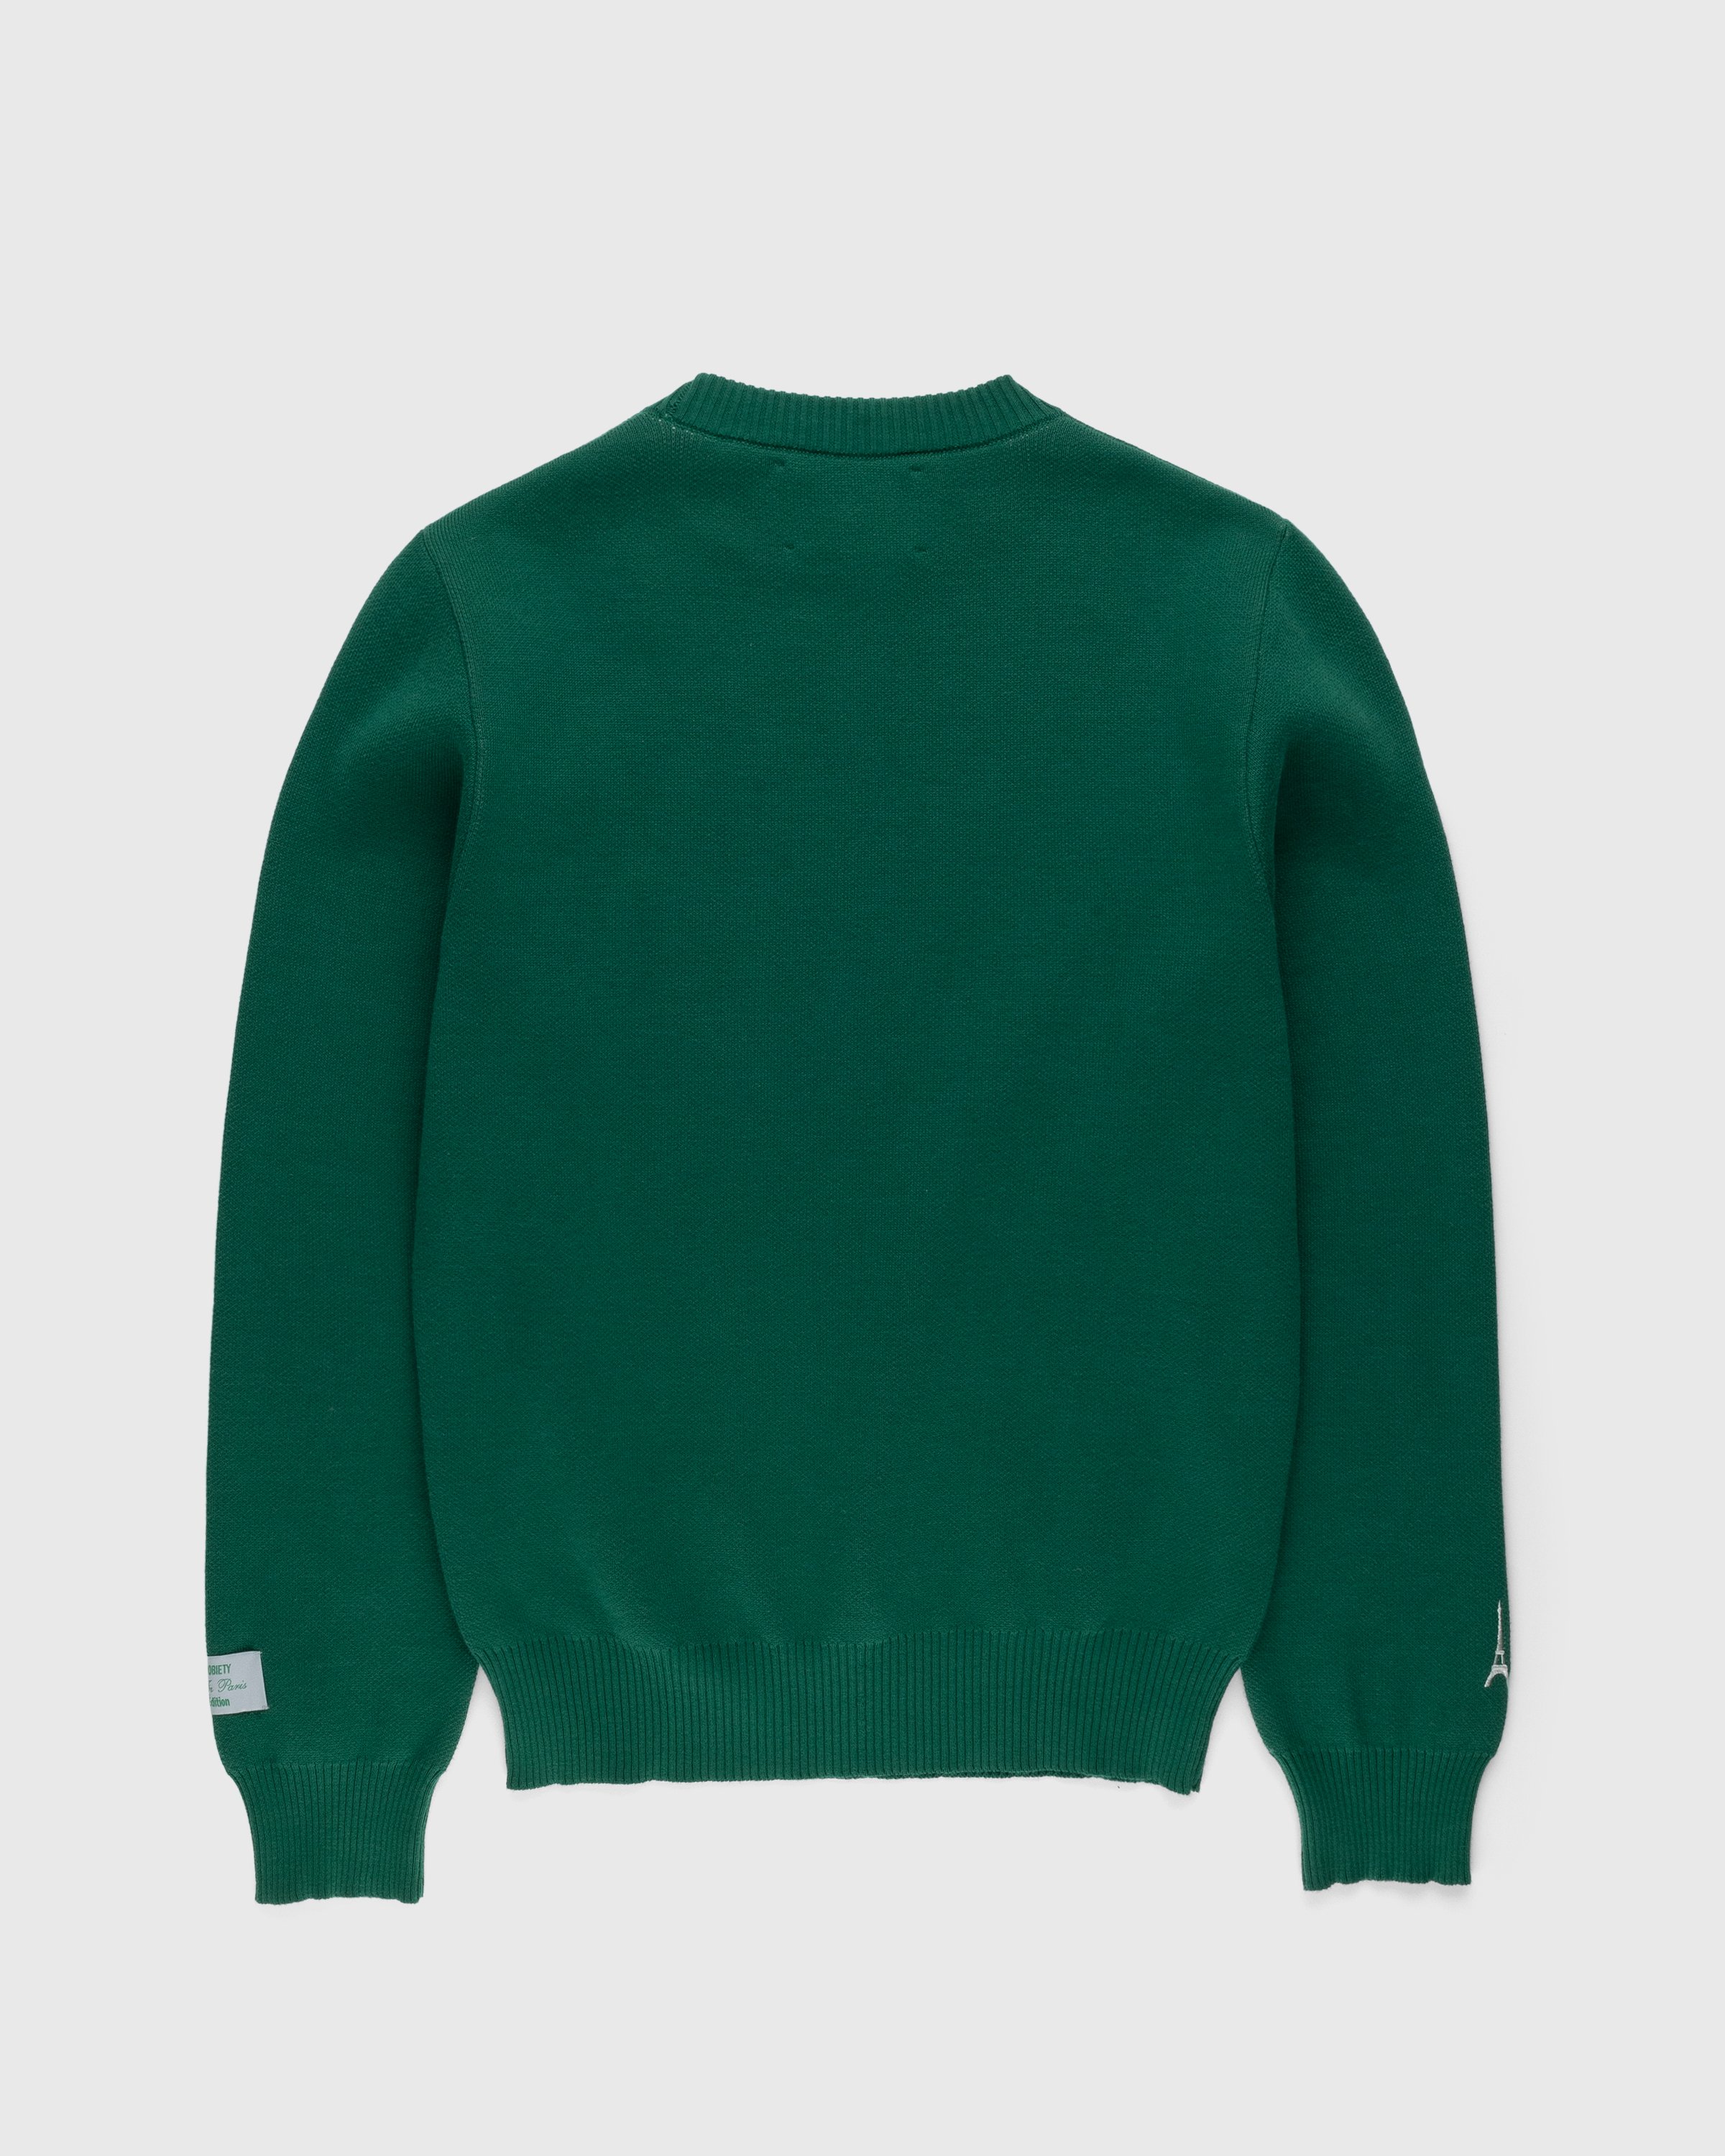 Highsnobiety - Not In Paris 4 Knitted Crewneck Sweater Green - Clothing - Green - Image 2